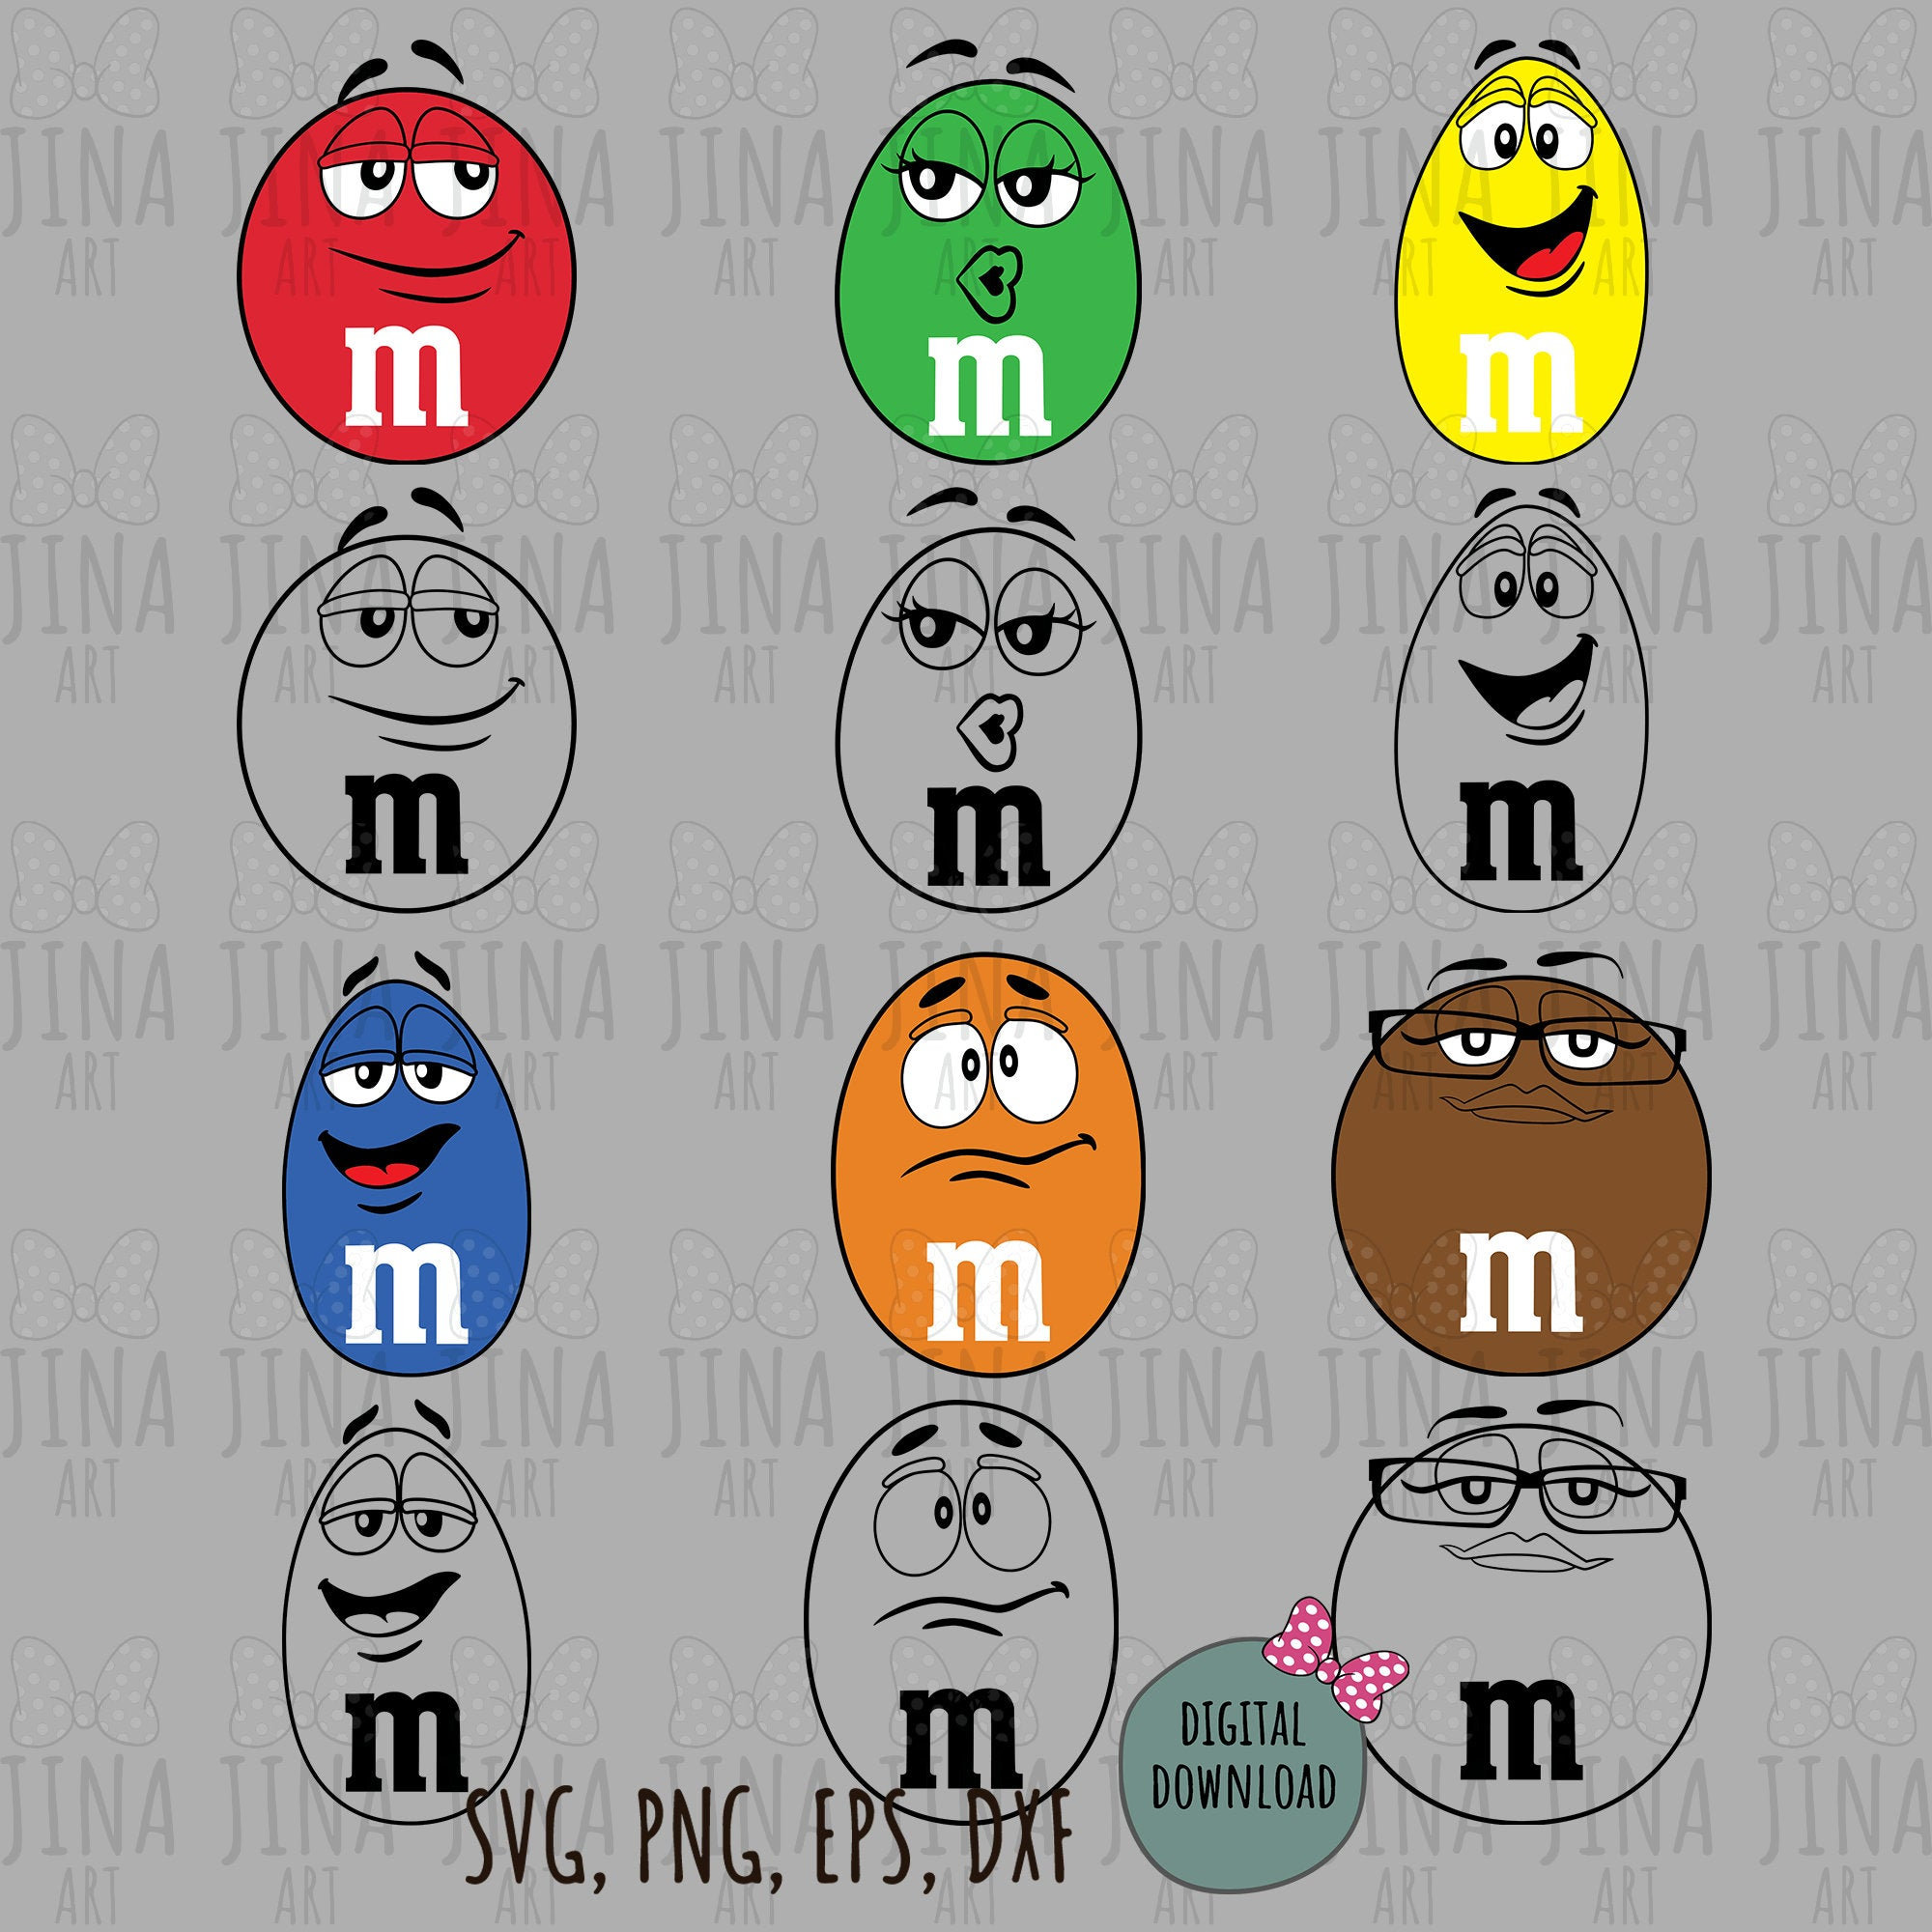 m and m svg,m and m faces svg,M&M Faces Svg